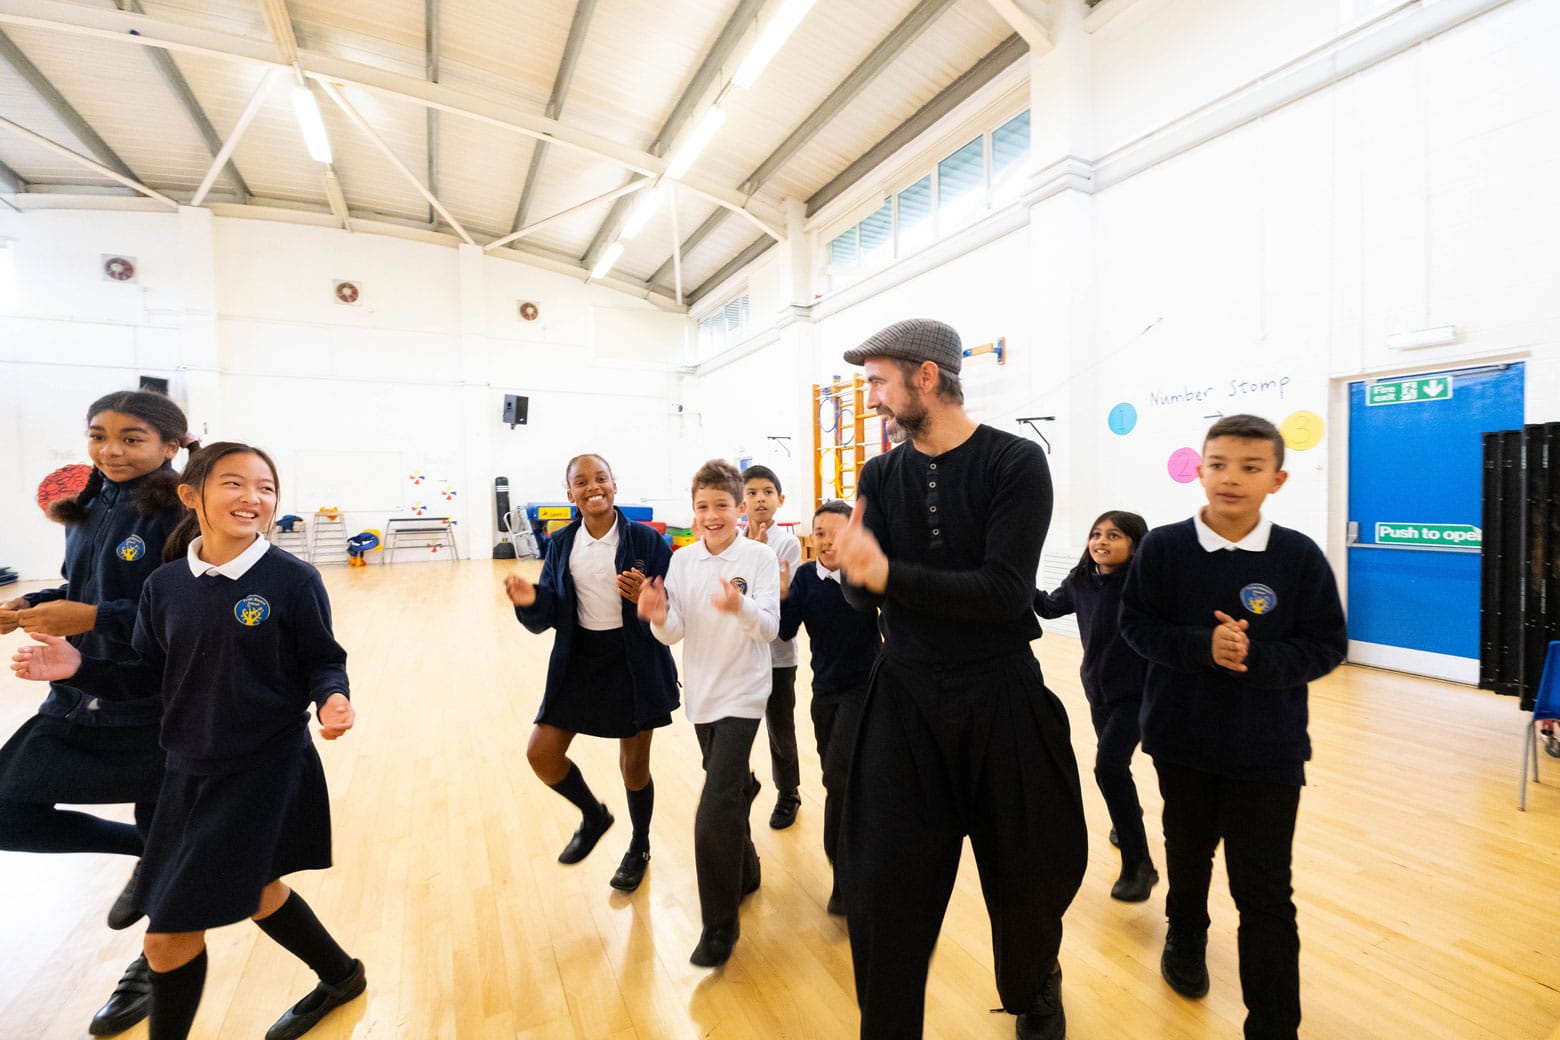 A group of school pupils doing a workshop in a school hall. Eight smiling pupils in uniform follow the workshop leader, a bearded man wearing a cap. The group are smiling and clapping.